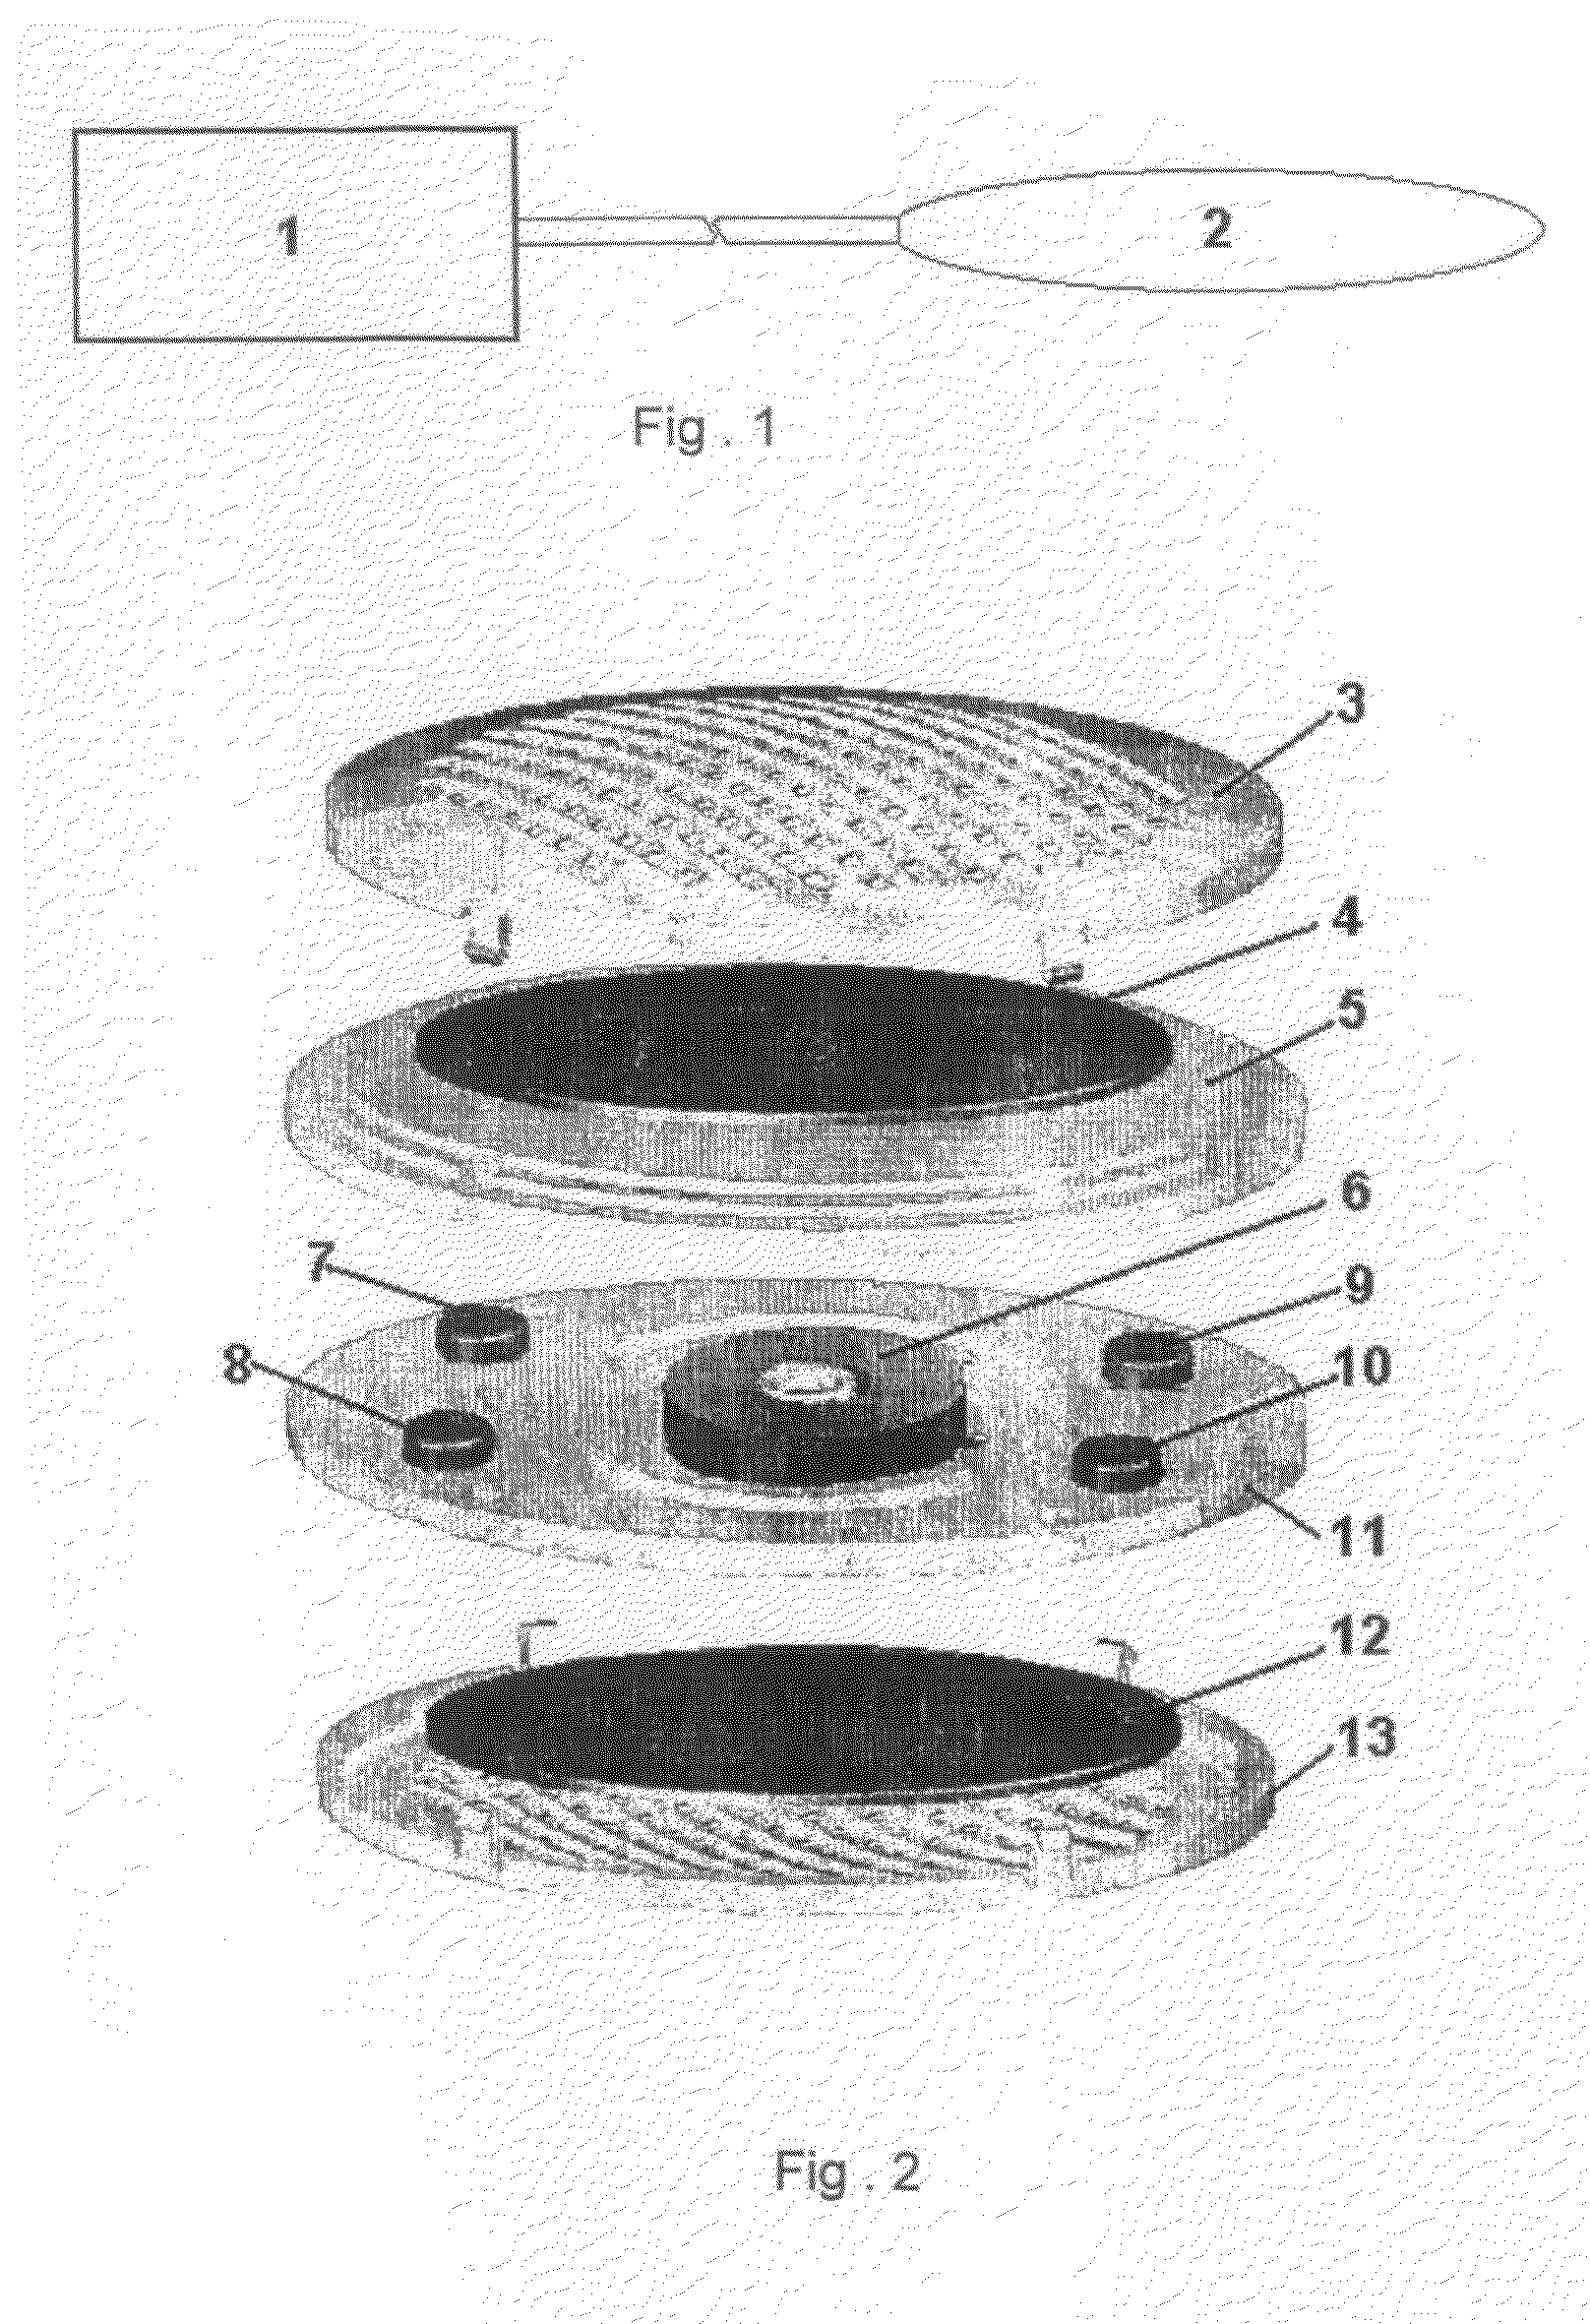 Method and Device for Cleaning of Textile Materials in a Water Environment